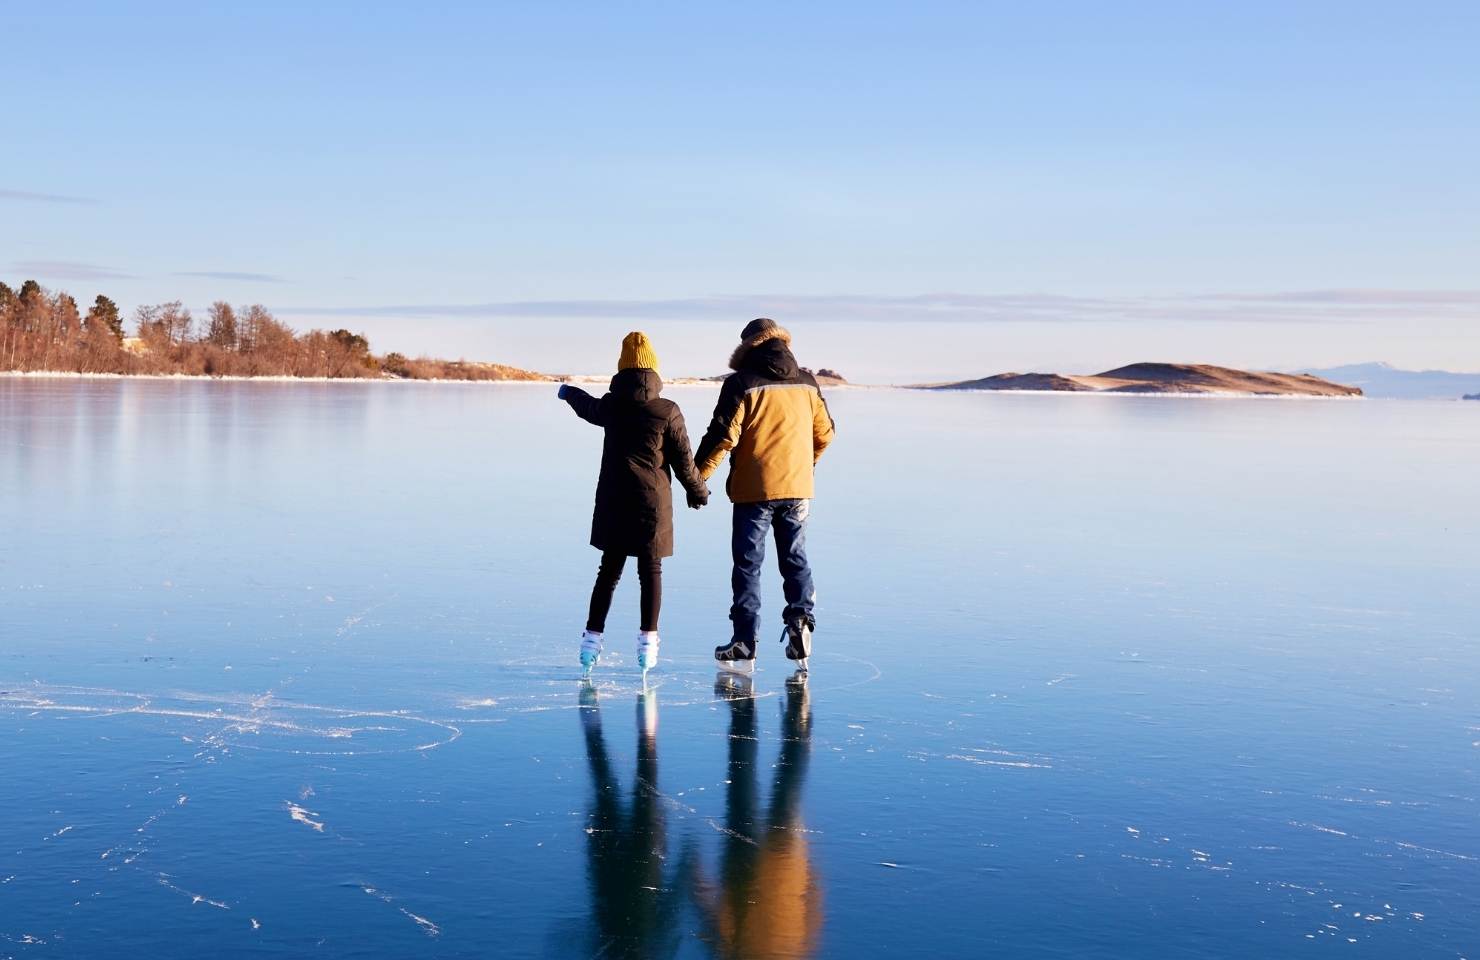 two people ice skating on a frozen lake in the winter